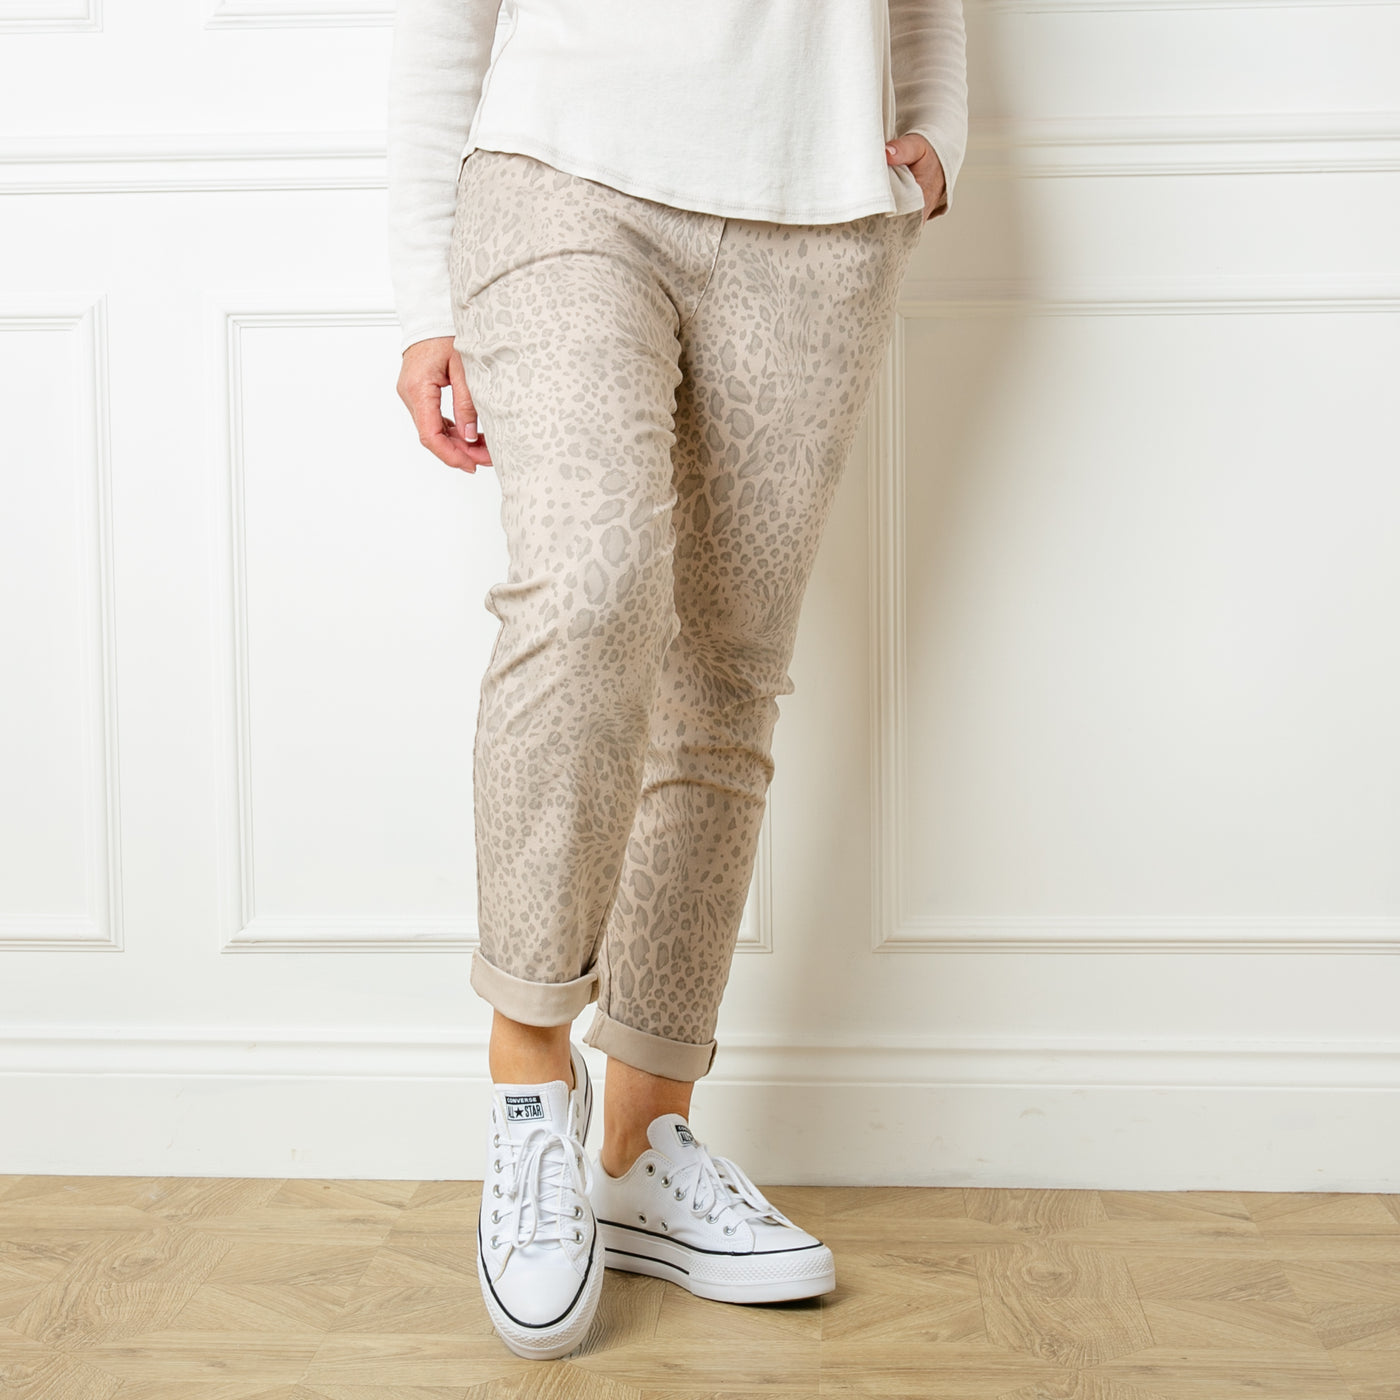 The stone beige cream brown Animal Print Stretch Trousers with a drawstring elasticated waistband and pockets on either side